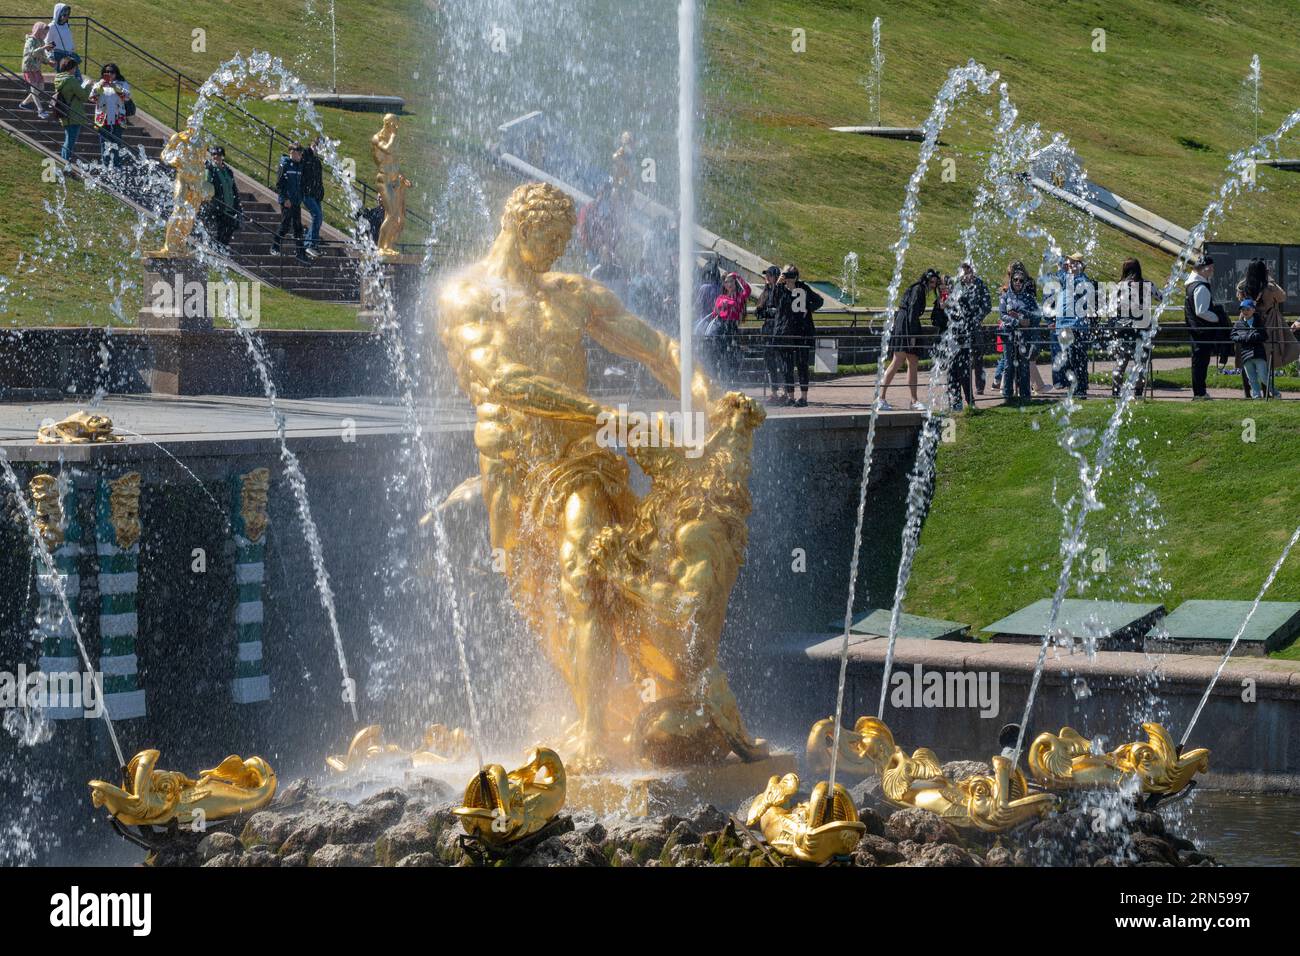 PETRODVORETS, RUSSIA - MAY 11, 2023: Sculpture of Samson tearing the mouth of a lion close-up on a May day. Fountains of Peterhof Stock Photo